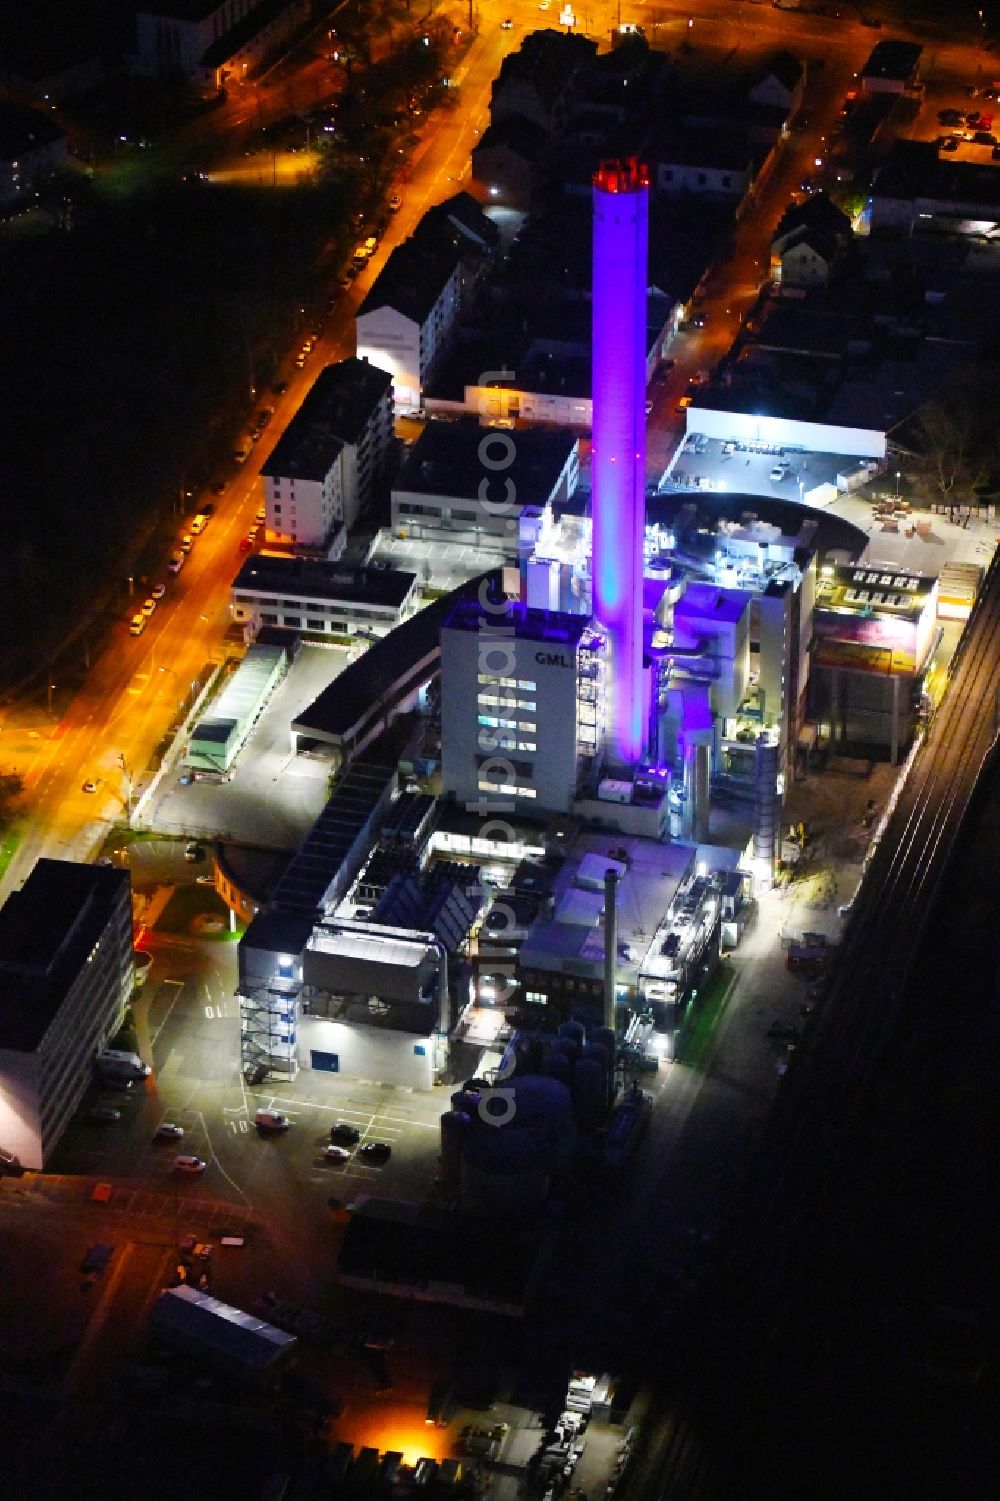 Aerial image at night Ludwigshafen am Rhein - Night lighting power plants and exhaust towers of Waste incineration plant station GML a?? Gemeinschafts-Muellheizkraftwerk in the district Friesenheim in Ludwigshafen am Rhein in the state Rhineland-Palatinate, Germany